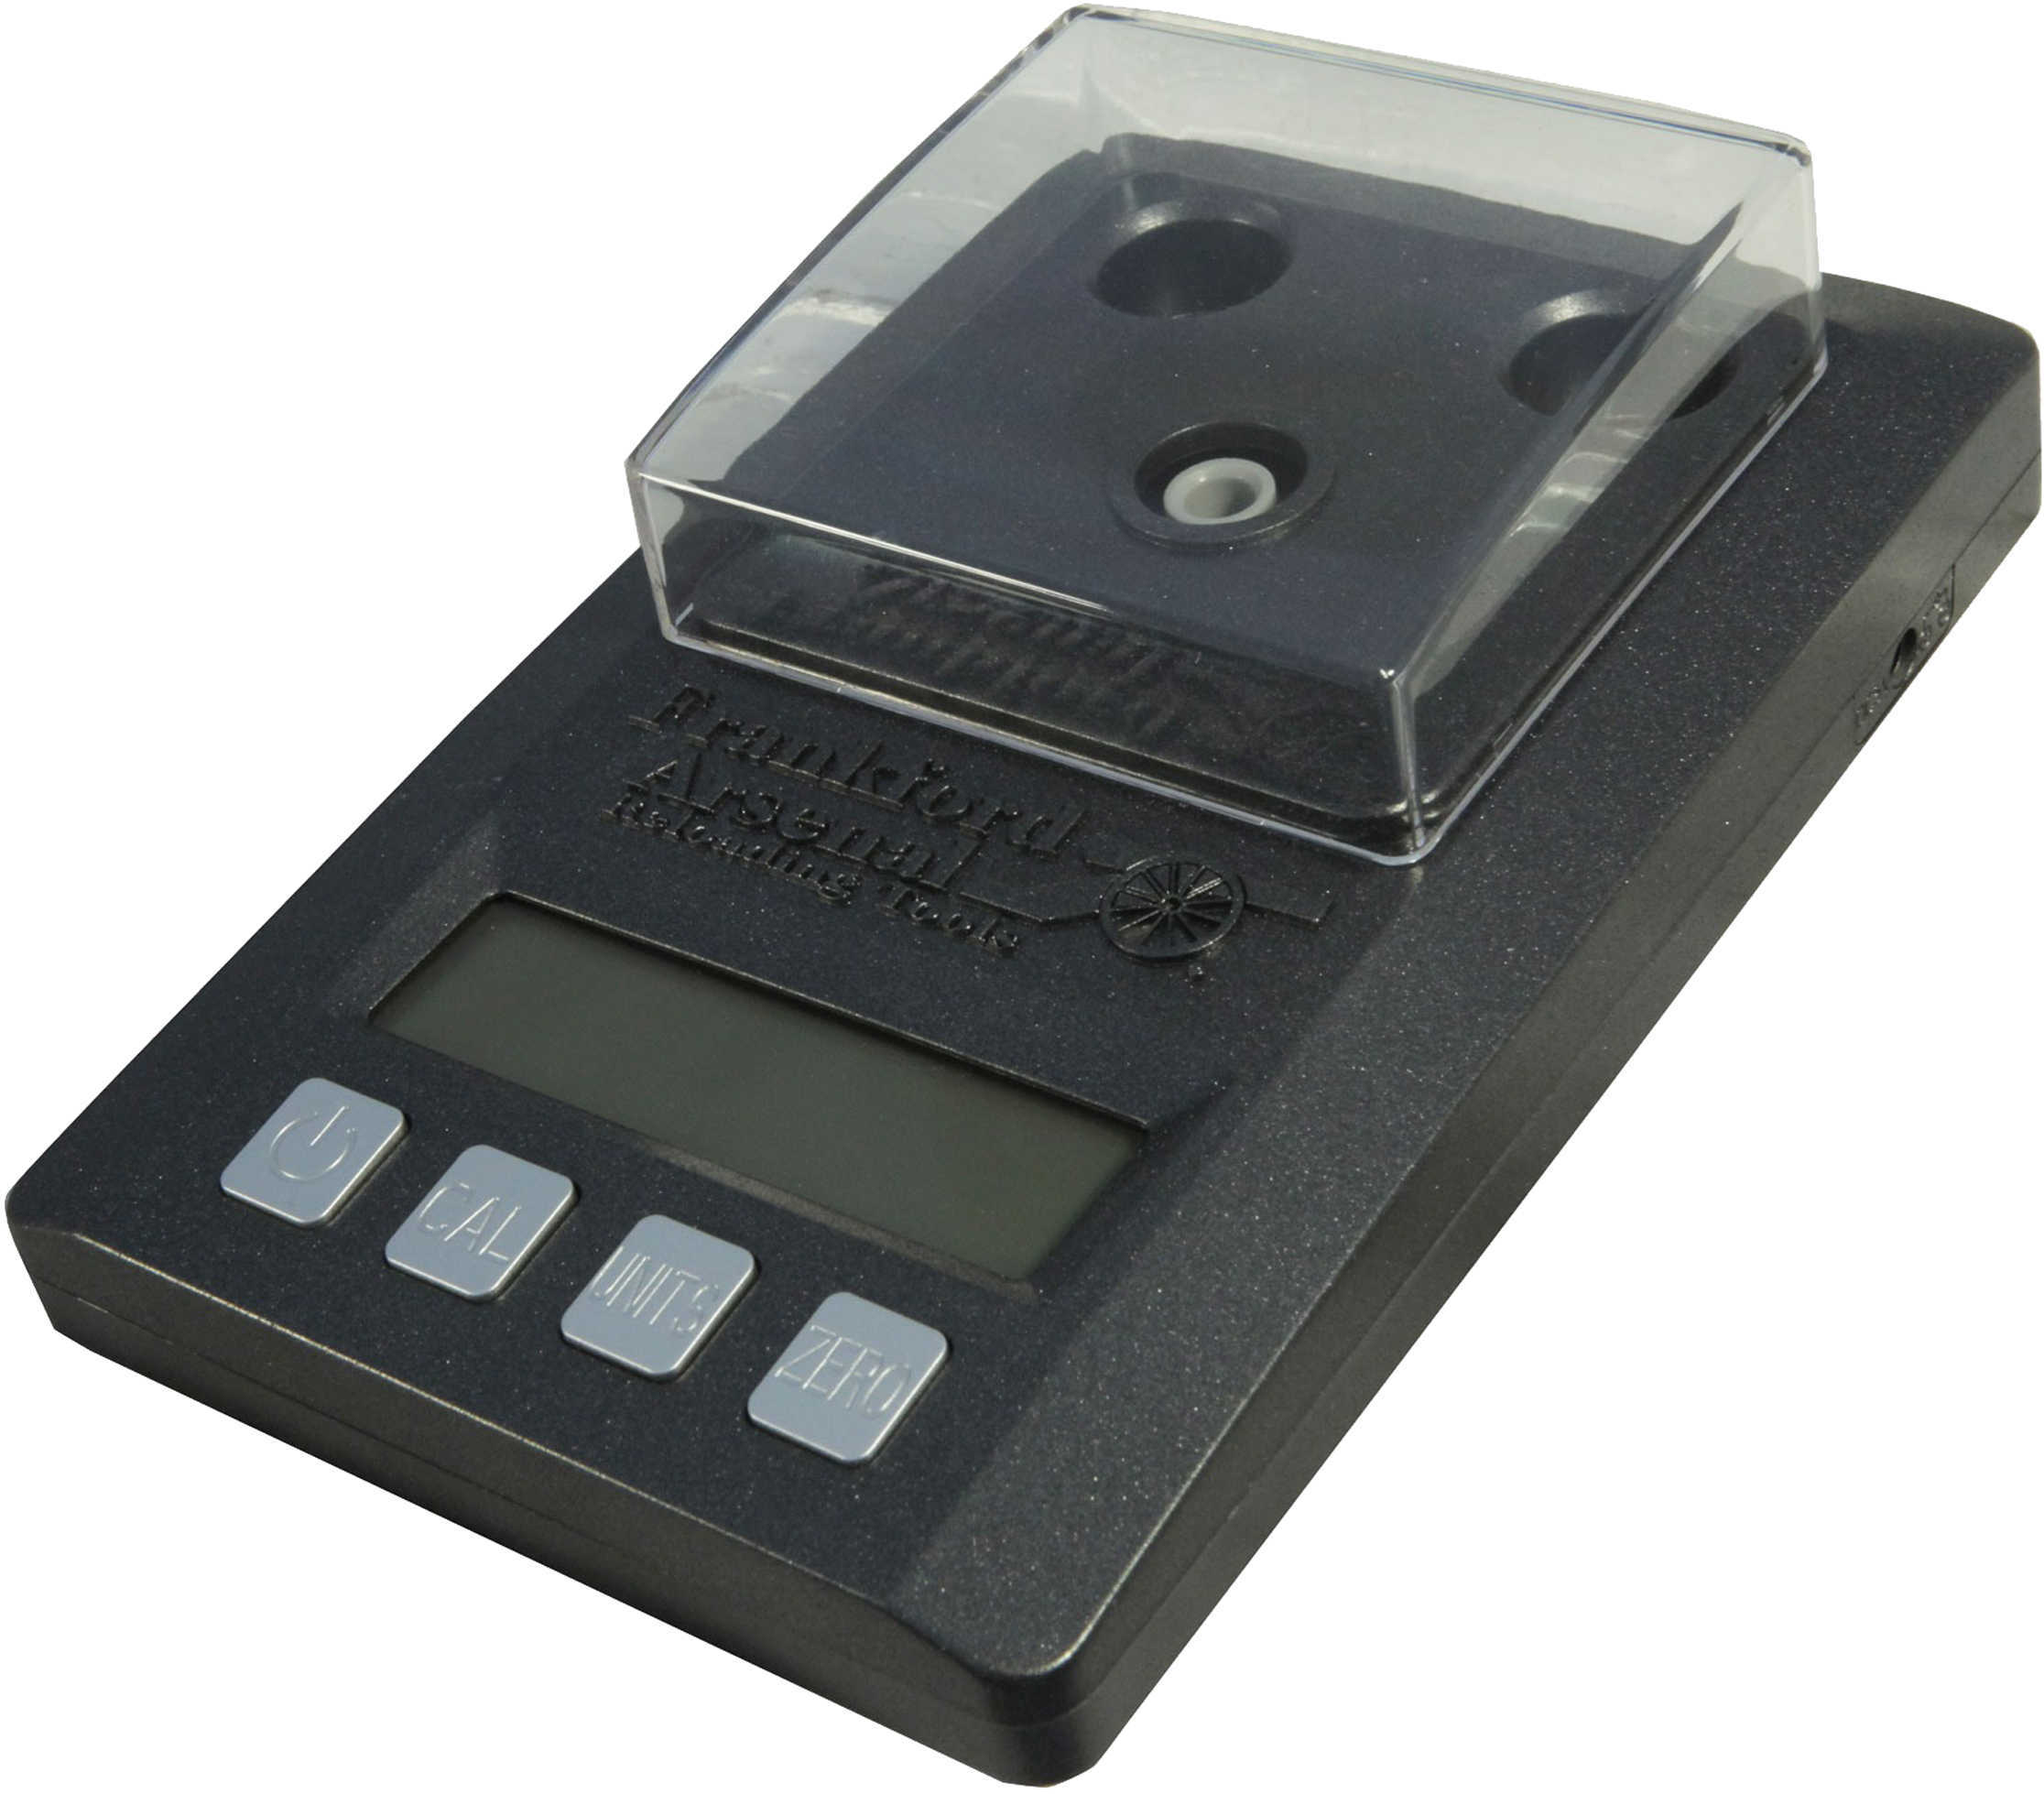 Frankford Arsenal Platinum Series Precision Scale with Case Md: 909672